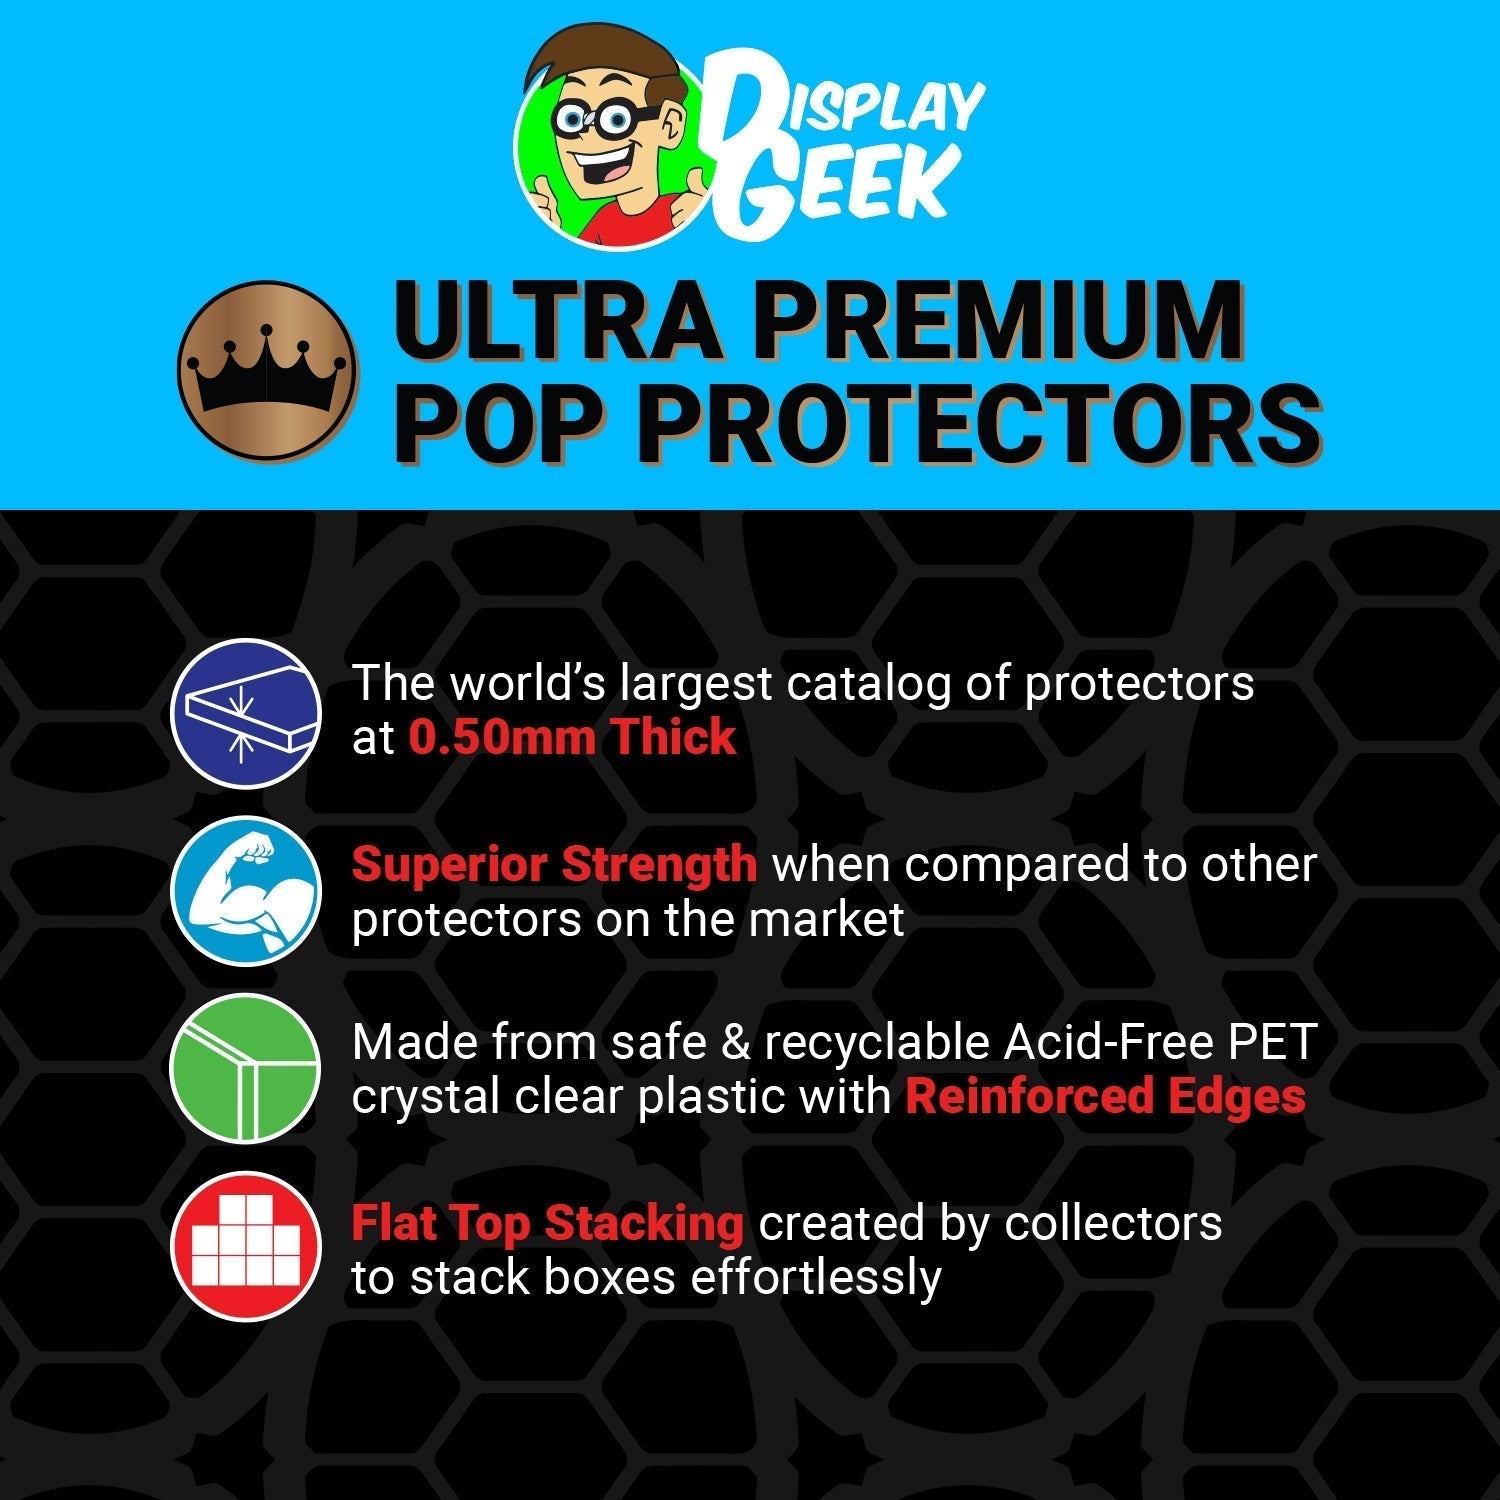 Pop Protector for 2 Pack Sally & Jack Funko Pocket Pop Keychains - PPG Pop Protector Guide Search Created by Display Geek